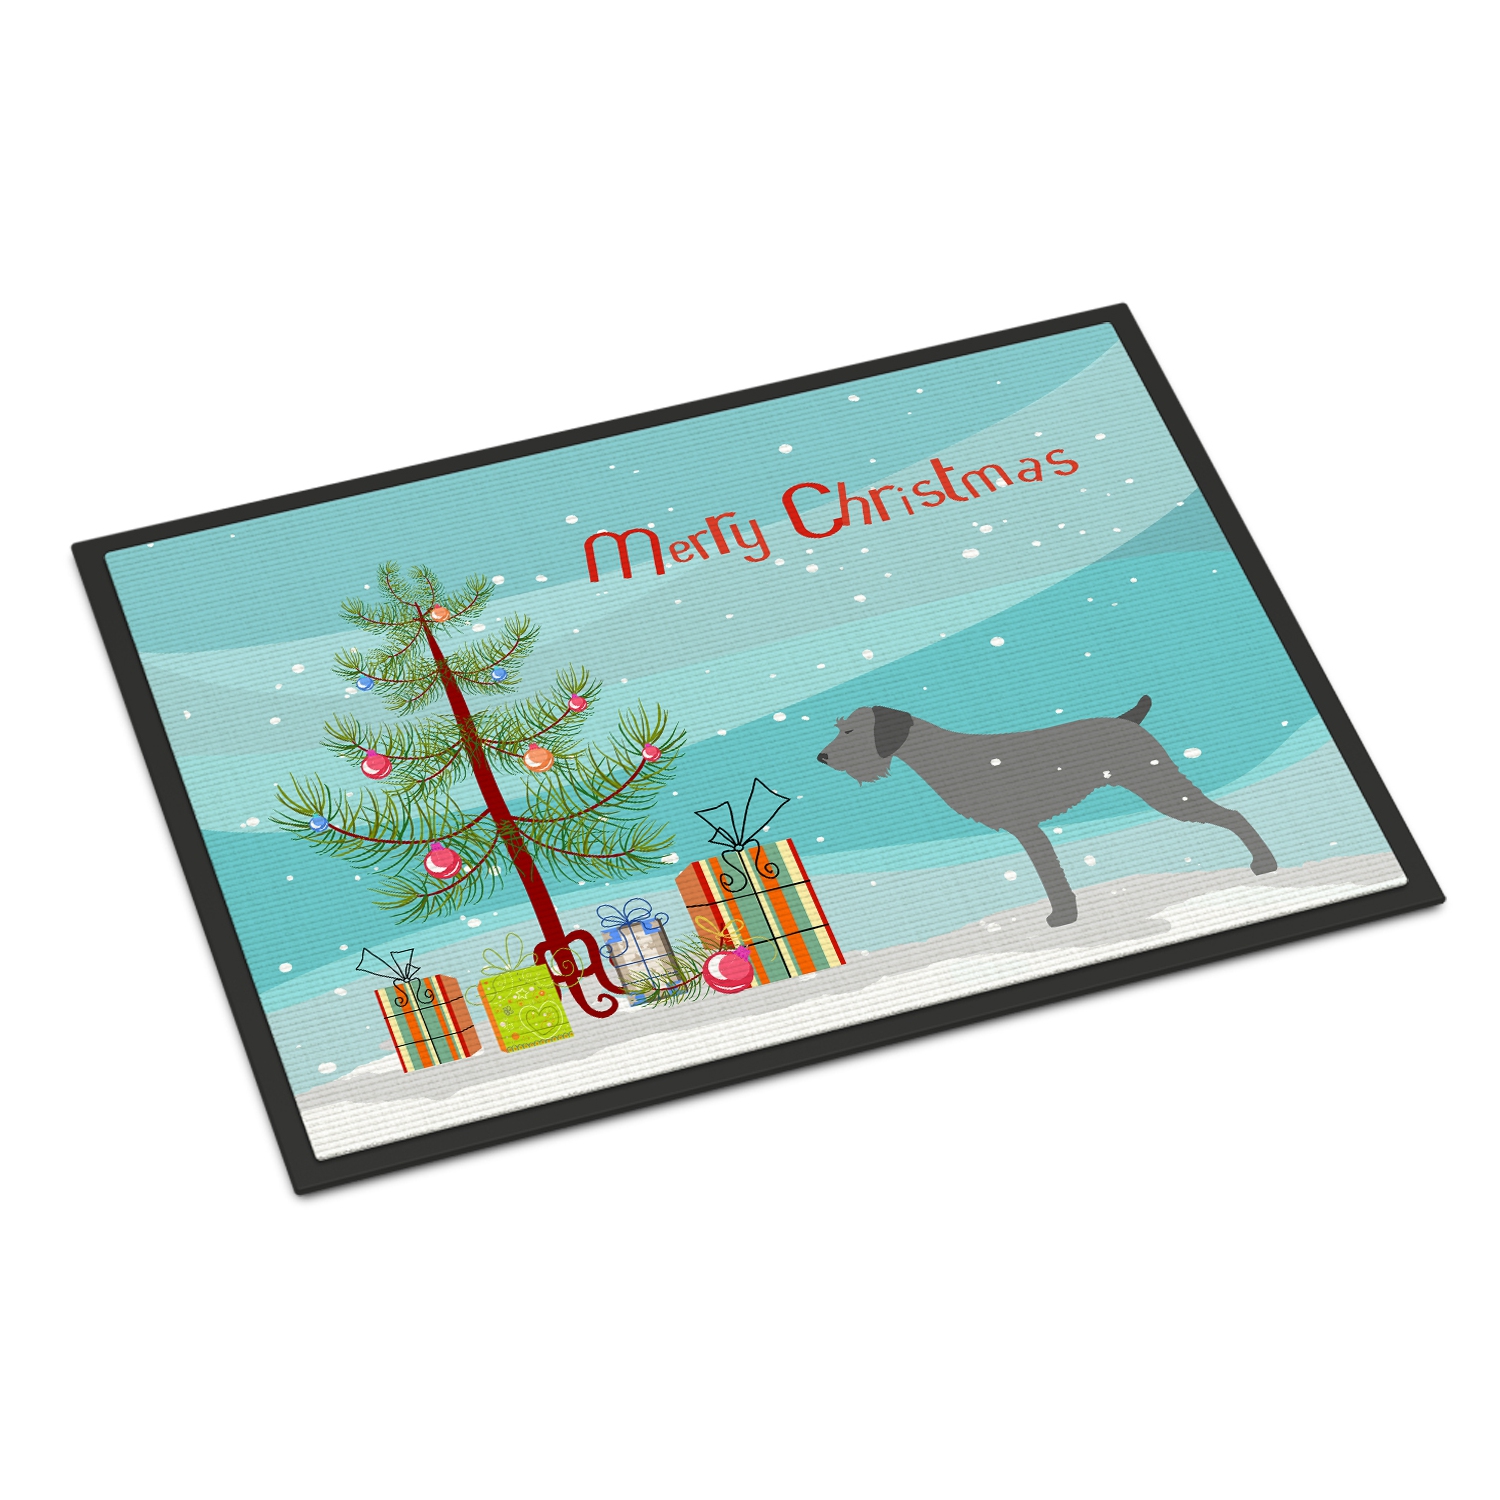 Carolines Treasures BB2929MAT German Wirehaired Pointer Merry Christmas Tree Indoor or Outdoor Mat 18x27